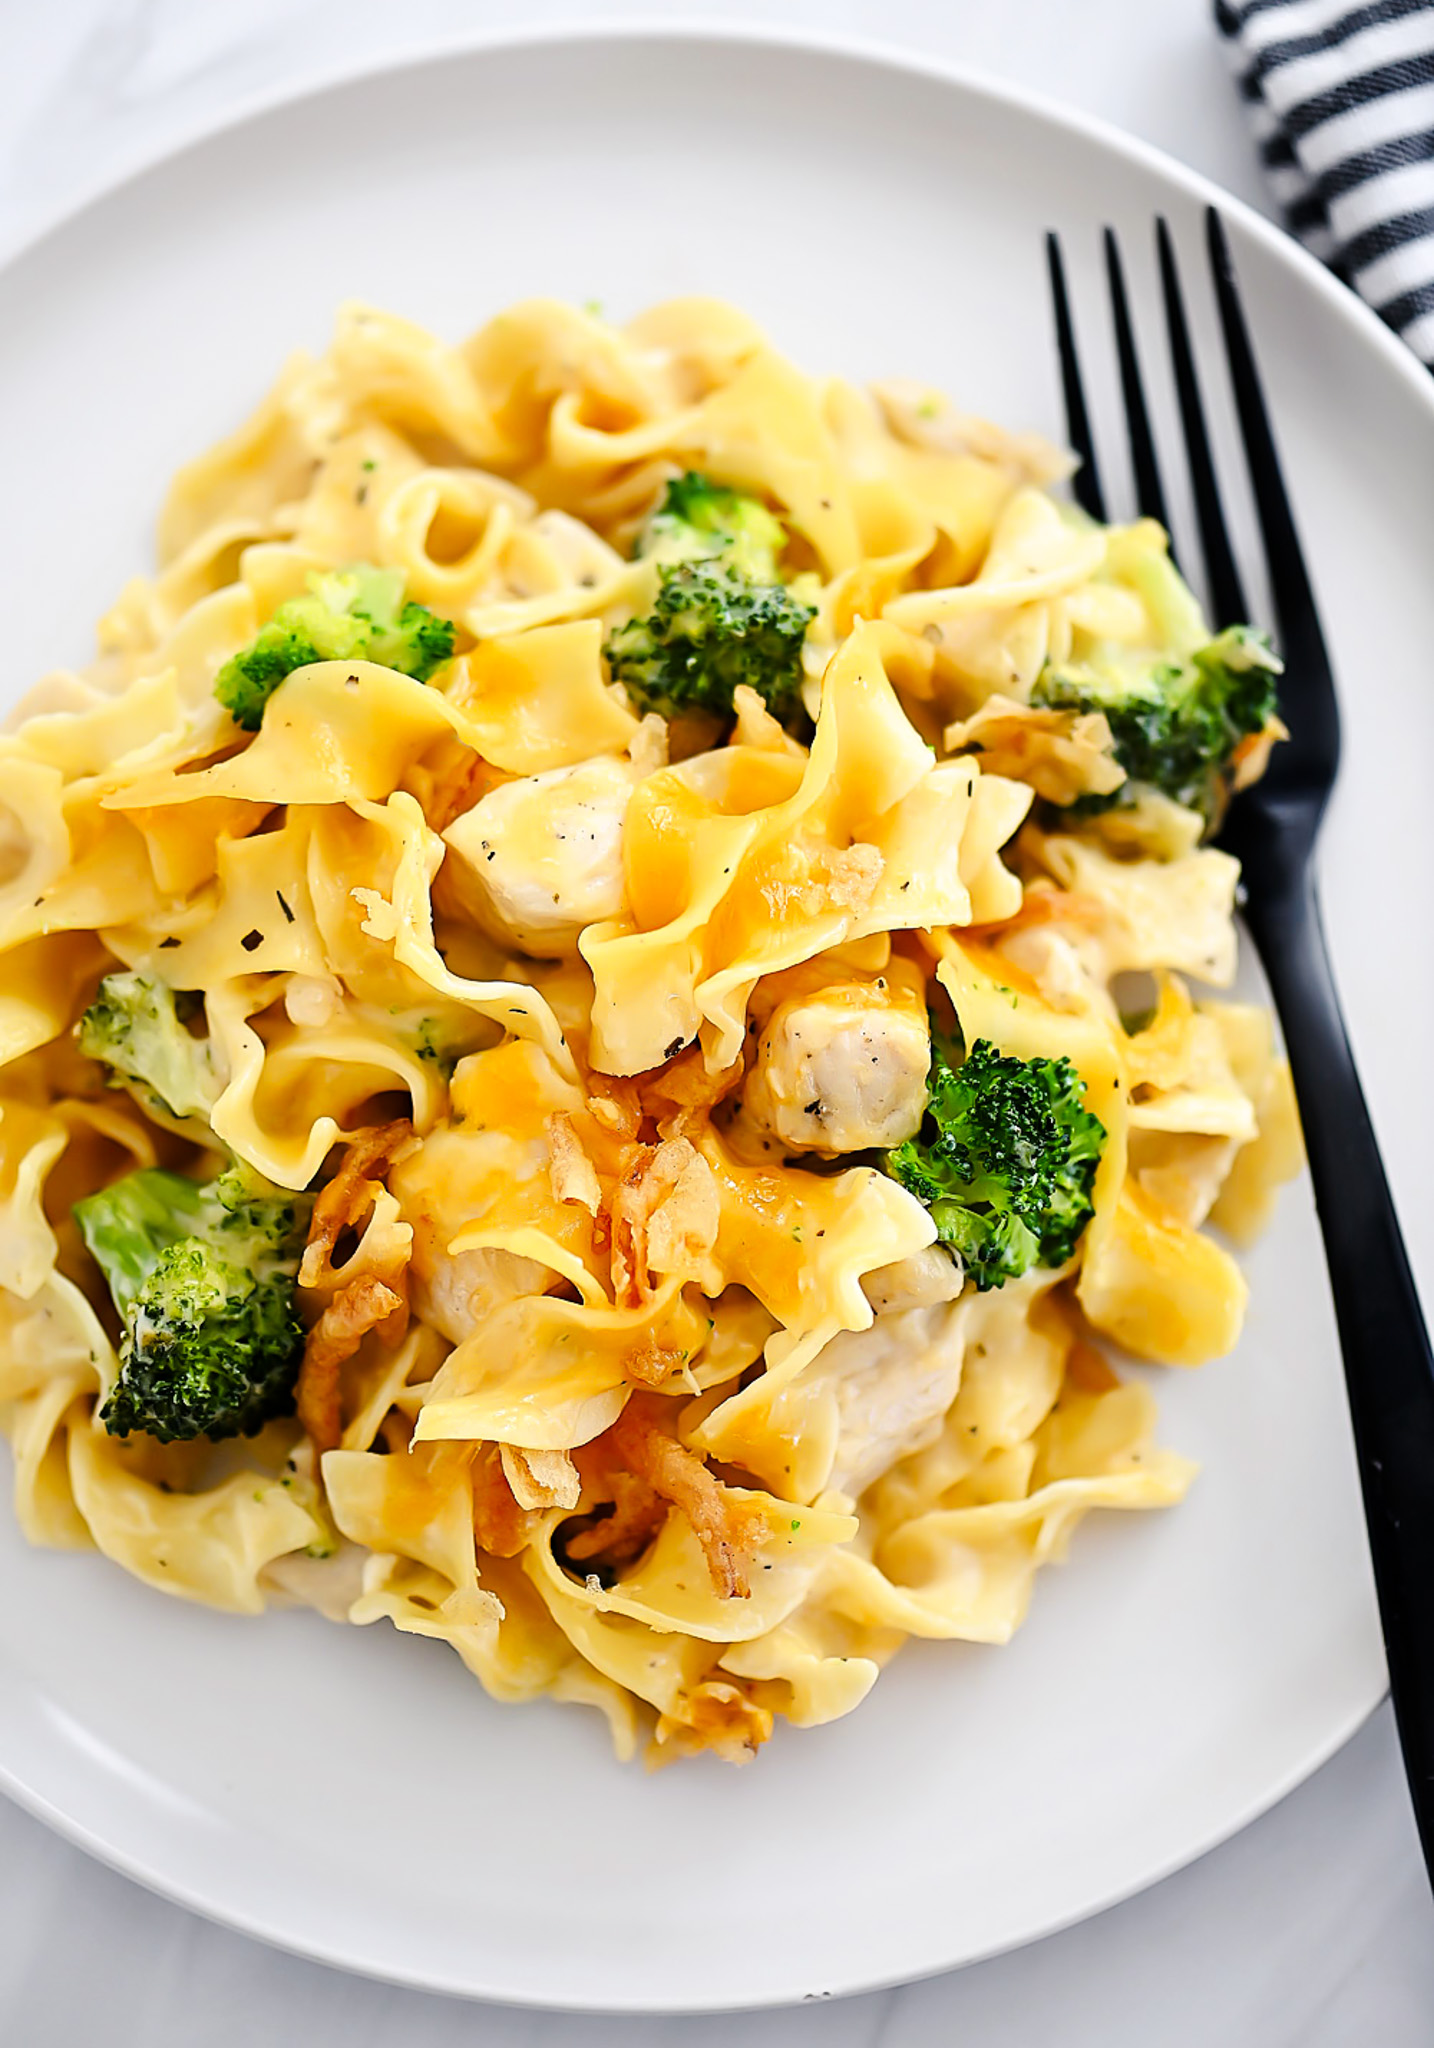 Cheesy Chicken, Broccoli and Noodles